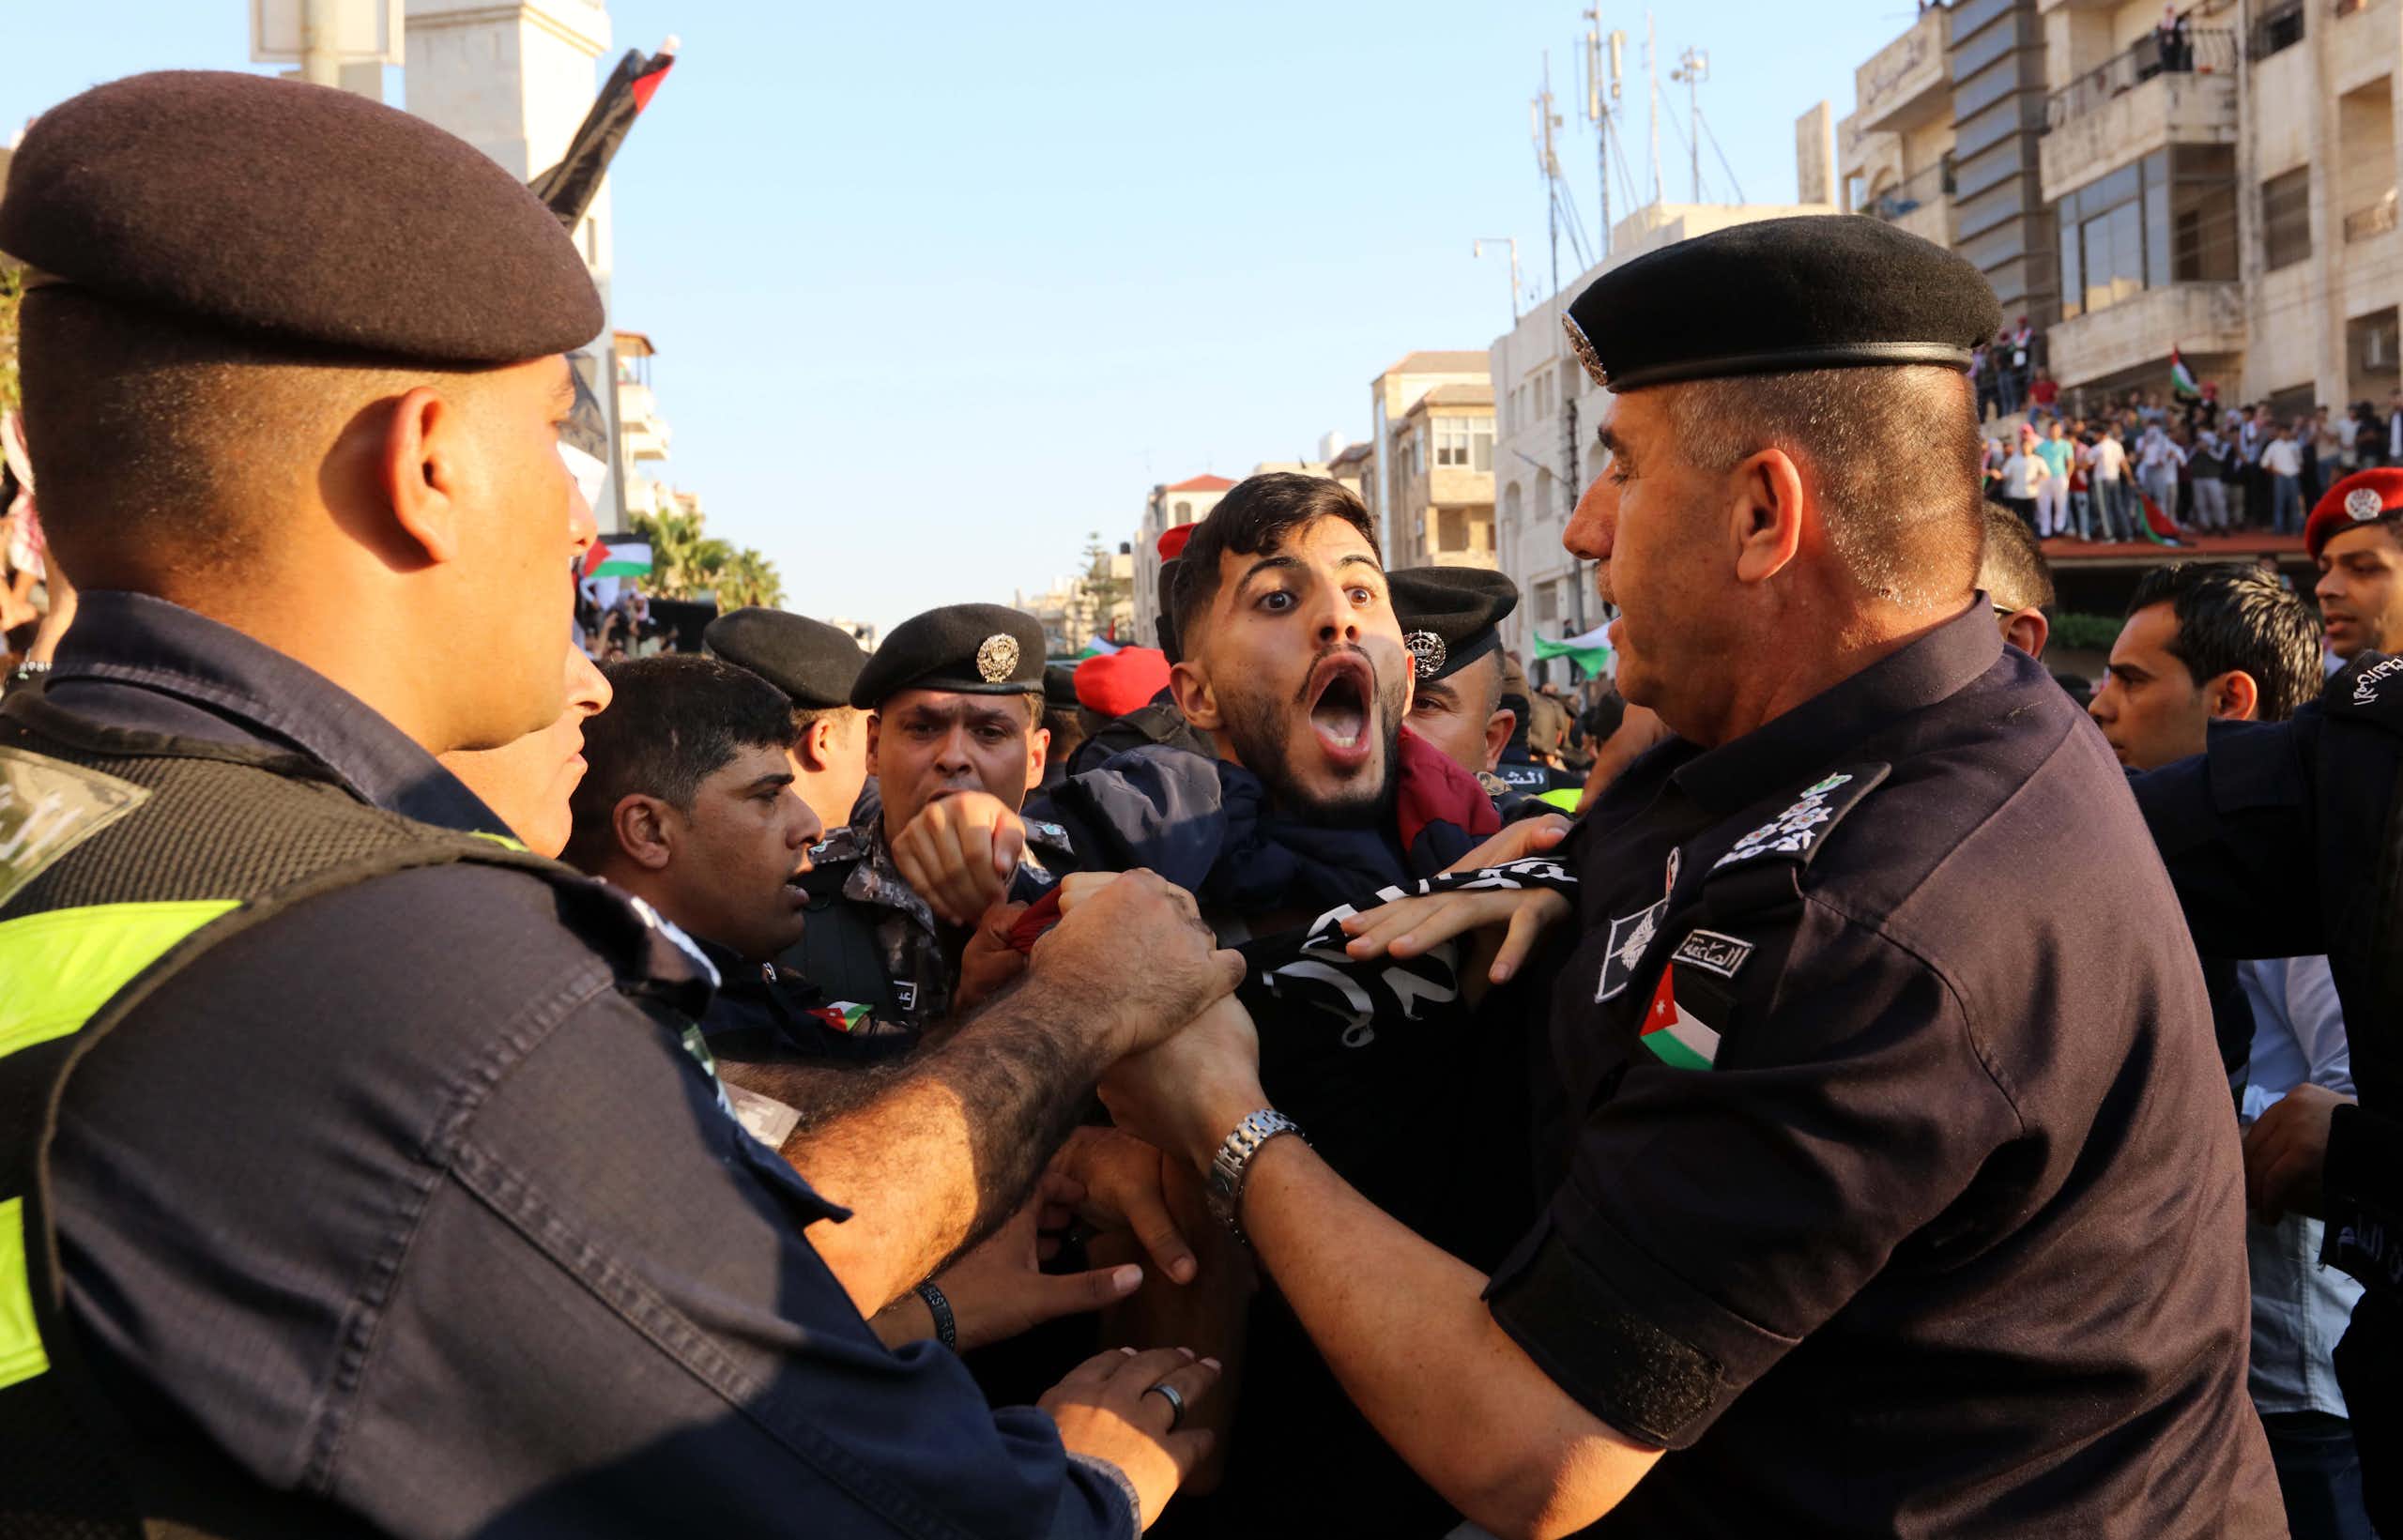 A protestor with his mouth wide open being held back by security personnel. 